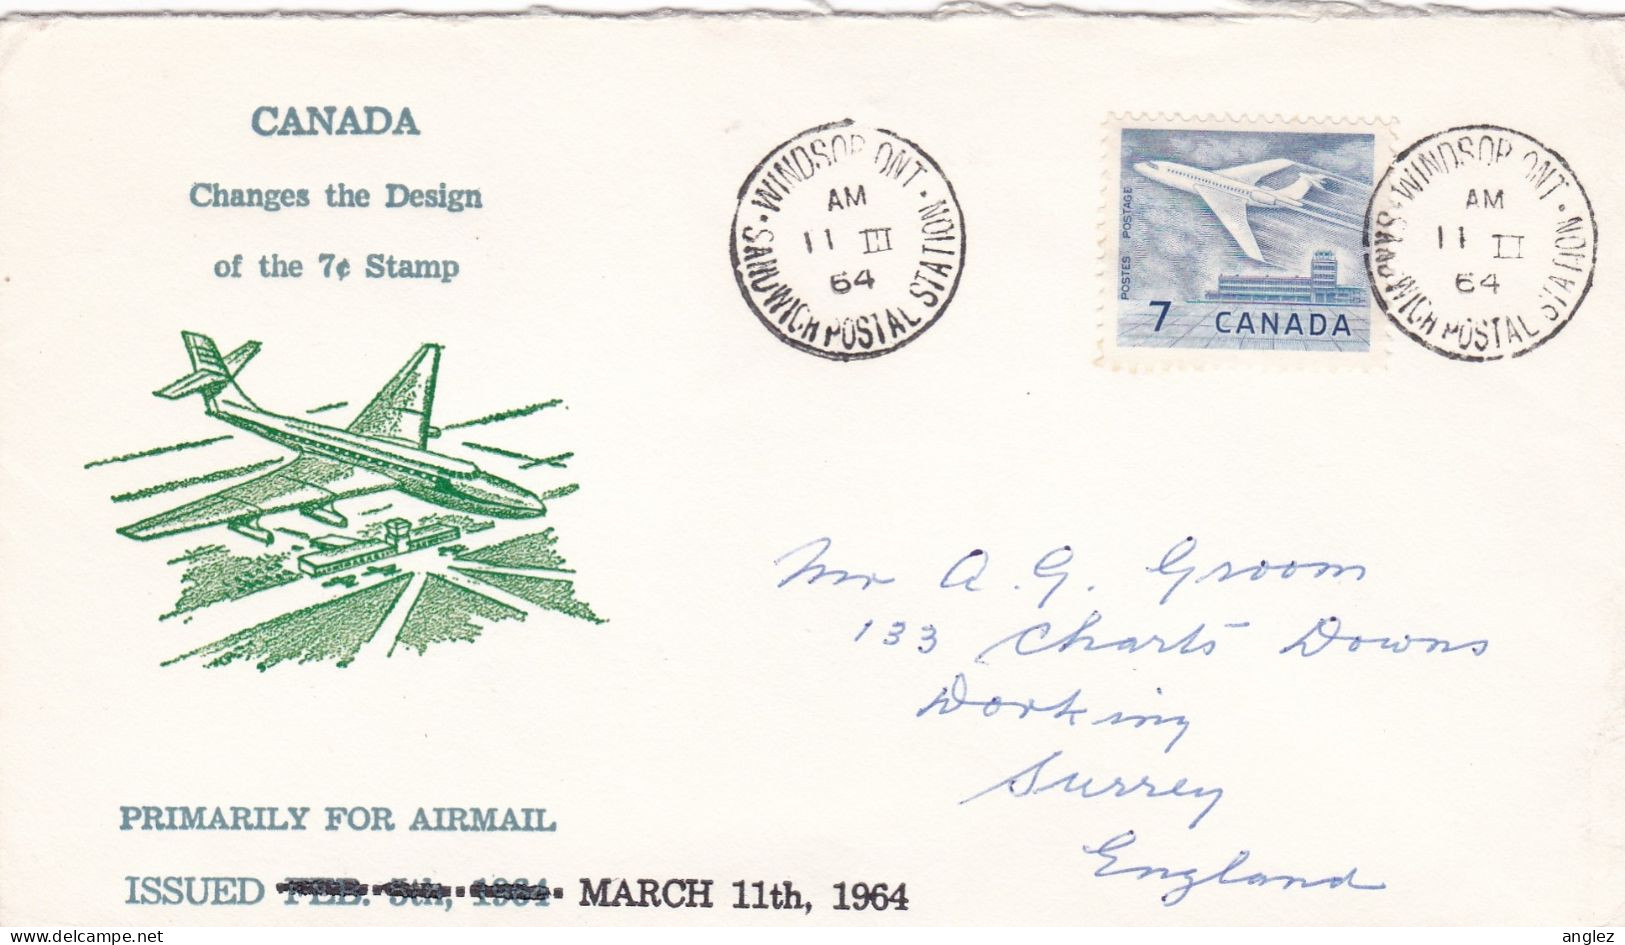 Canada - 1964 7c Airmail Stamp Changed Design Illustrated FDC - Charity Seal - Poste Aérienne